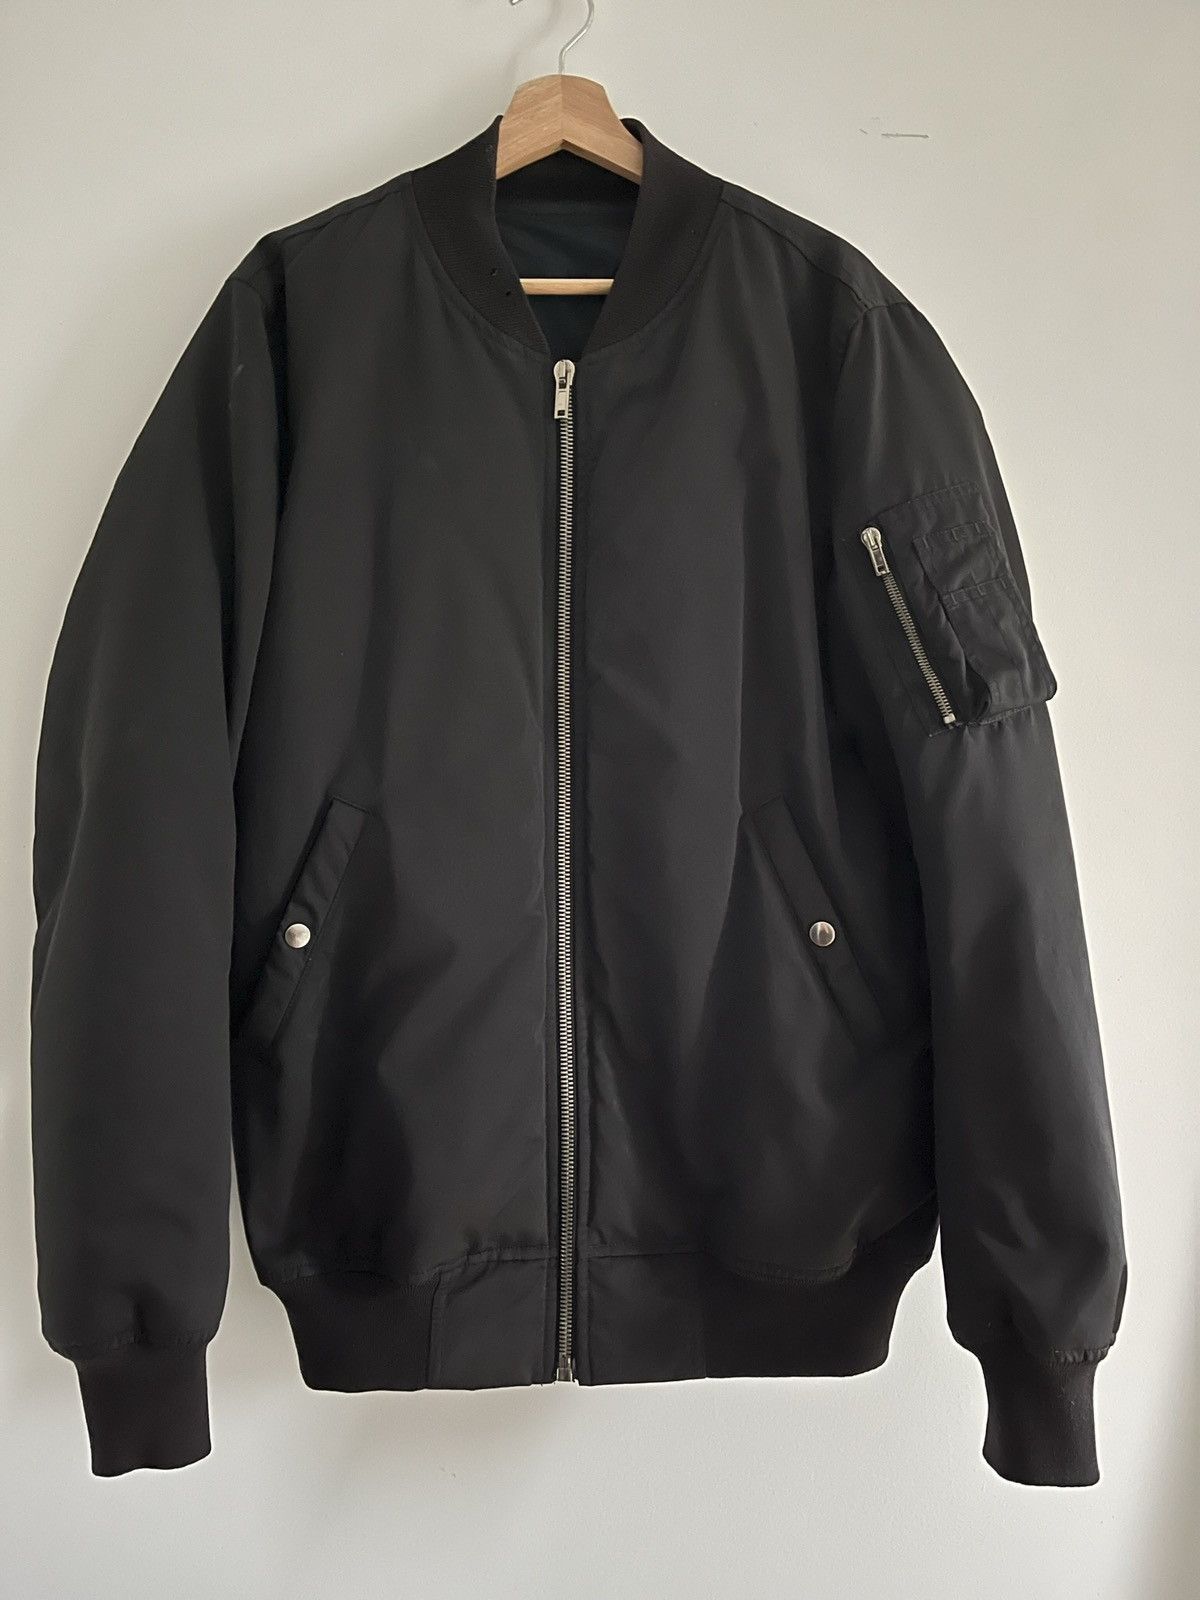 Rick Owens Rick Owens MA-1 Goose Down Bomber | Grailed